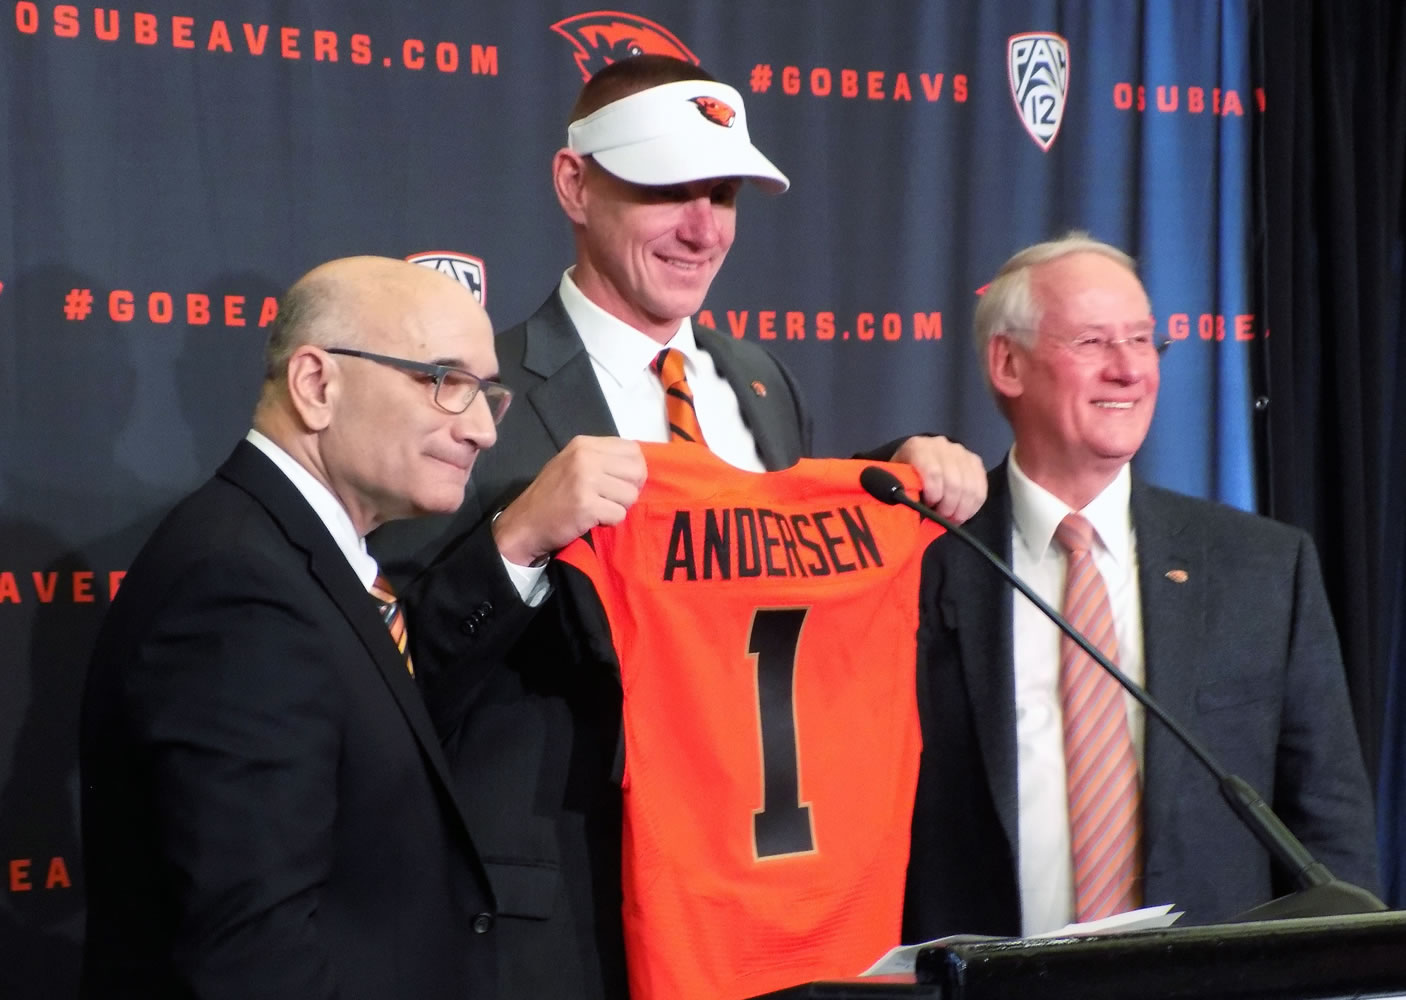 Oregon State new football coach, Gary Andersen, center, poses with Oregon State athletic director, Bob De Carolis, left, and Oregon State University president, Edward Ray, at a news conference in Corvallis, Oregon, on Friday.